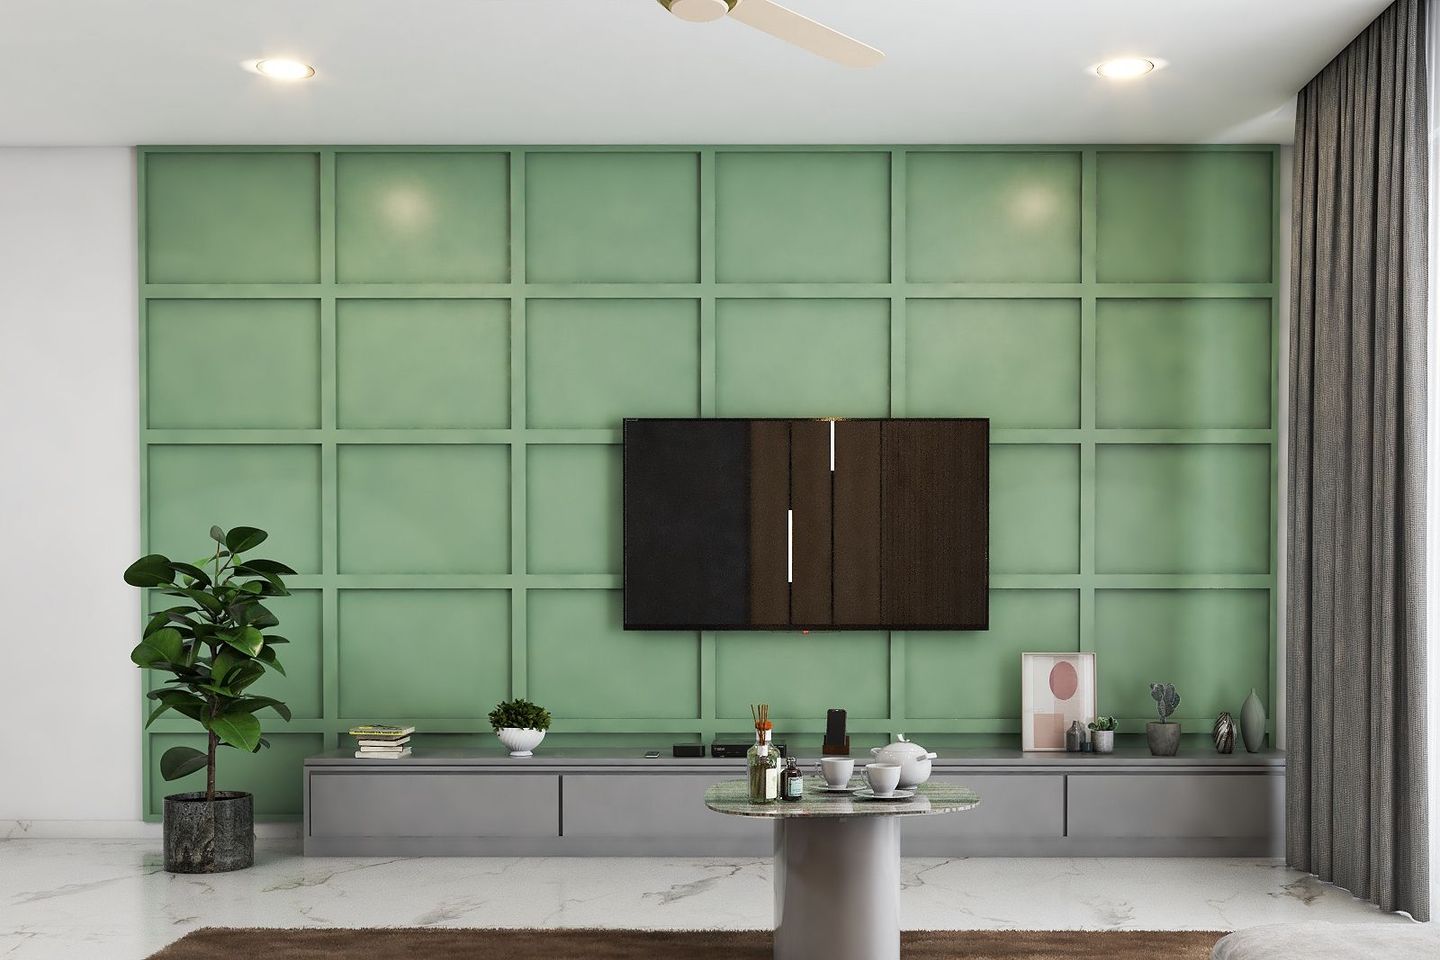 TV Unit Design With Dynamic Green Wall And Grey Accents-Livspace